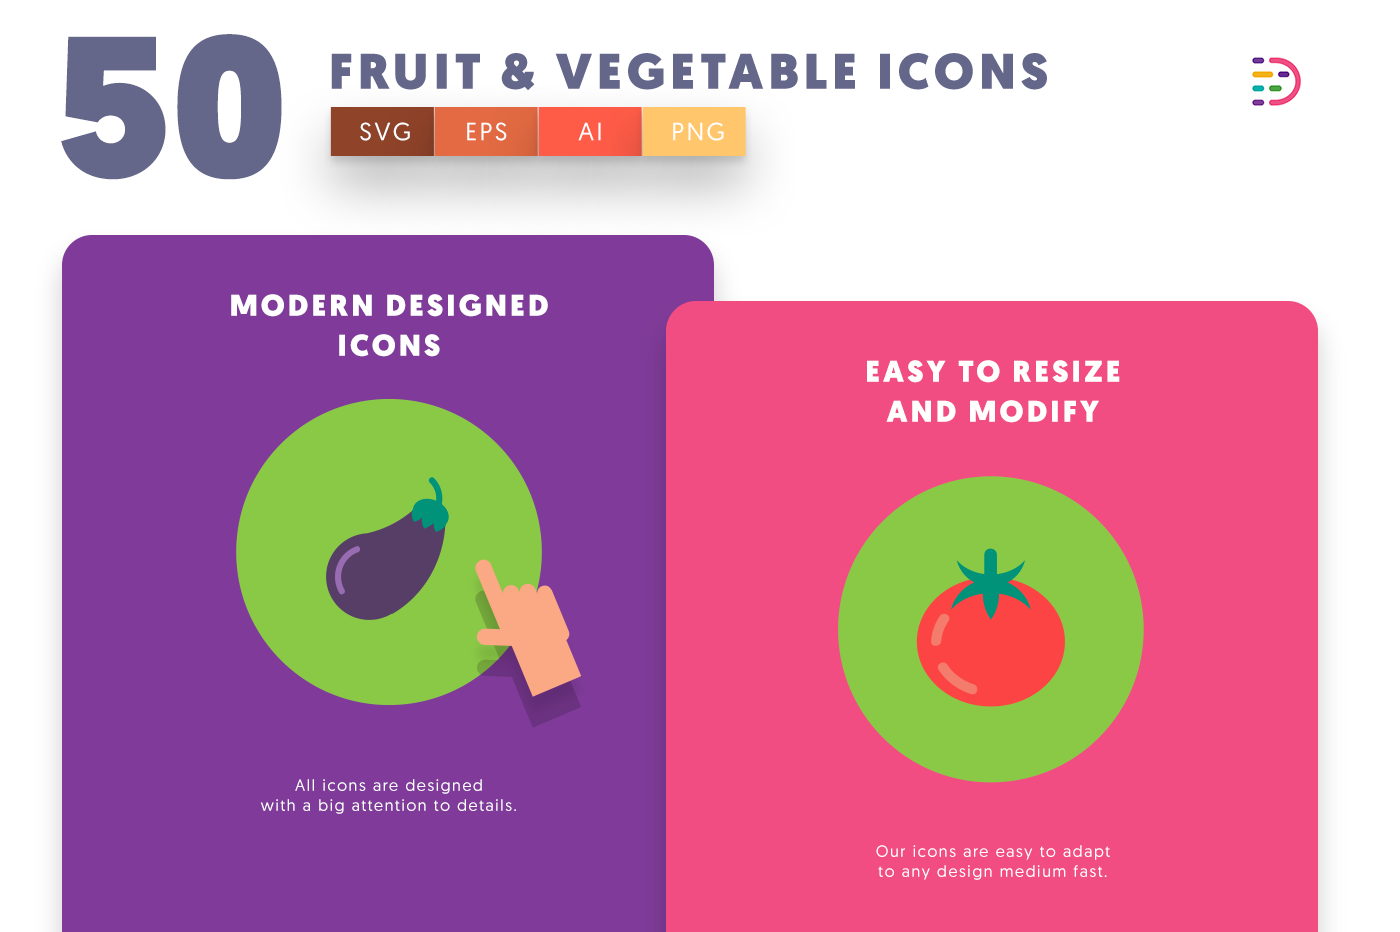 Customizable and vector 50 Fruits & Vegetable Icons